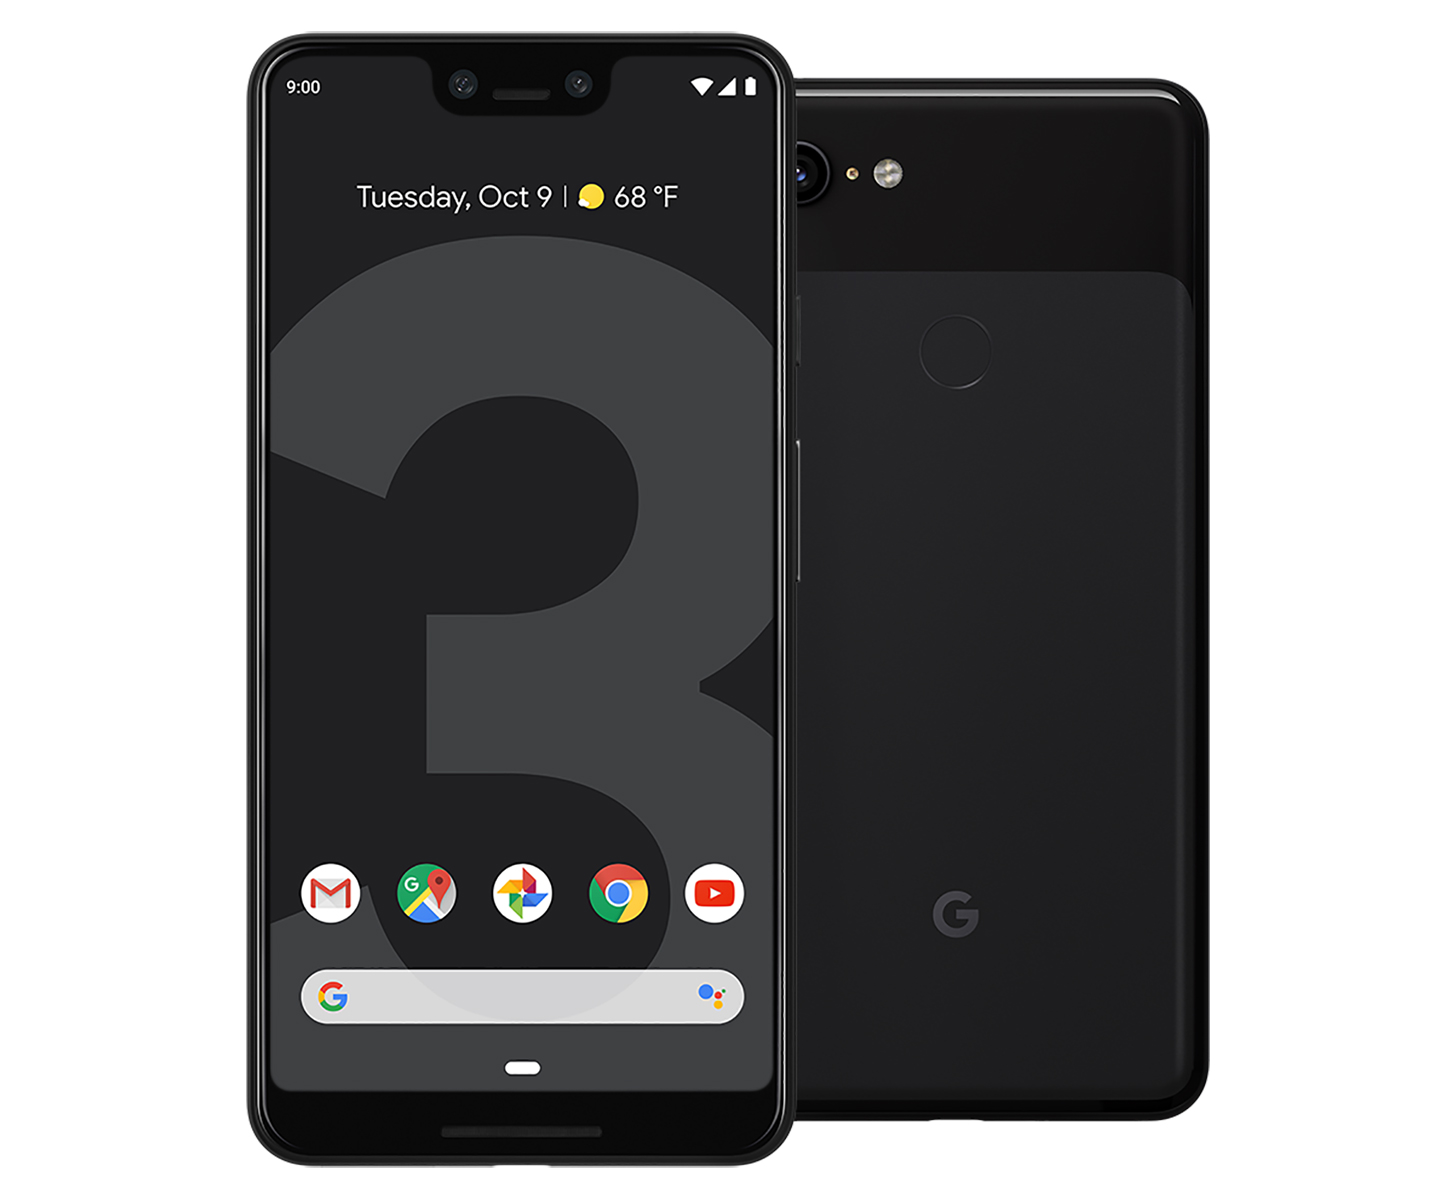 Verizon Pixel 3 SIM lock has been temporarily removed News.Wirefly